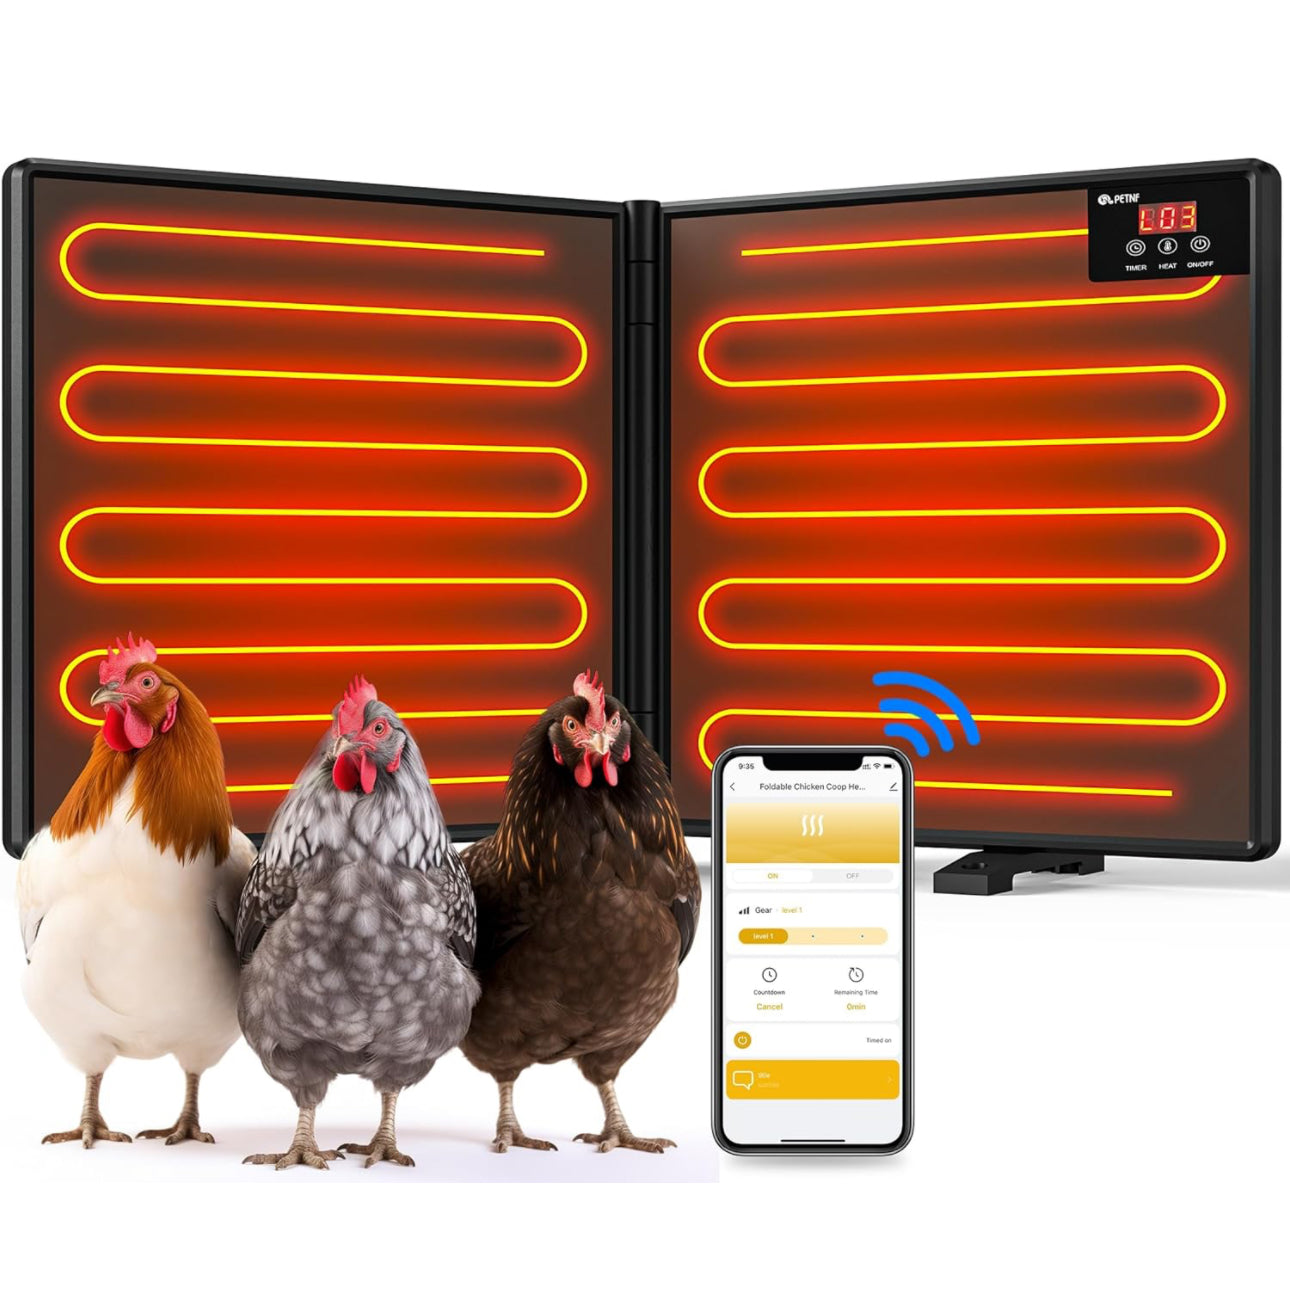 Chicken Coop Heater for Winter with APP Control, 30''x12'' Large Foldable Chicken Heaters for Coop with Adjustable Timer and Temp, Heater for Chicken Coop Accessories Pet House,180W Radiant Heat Panel